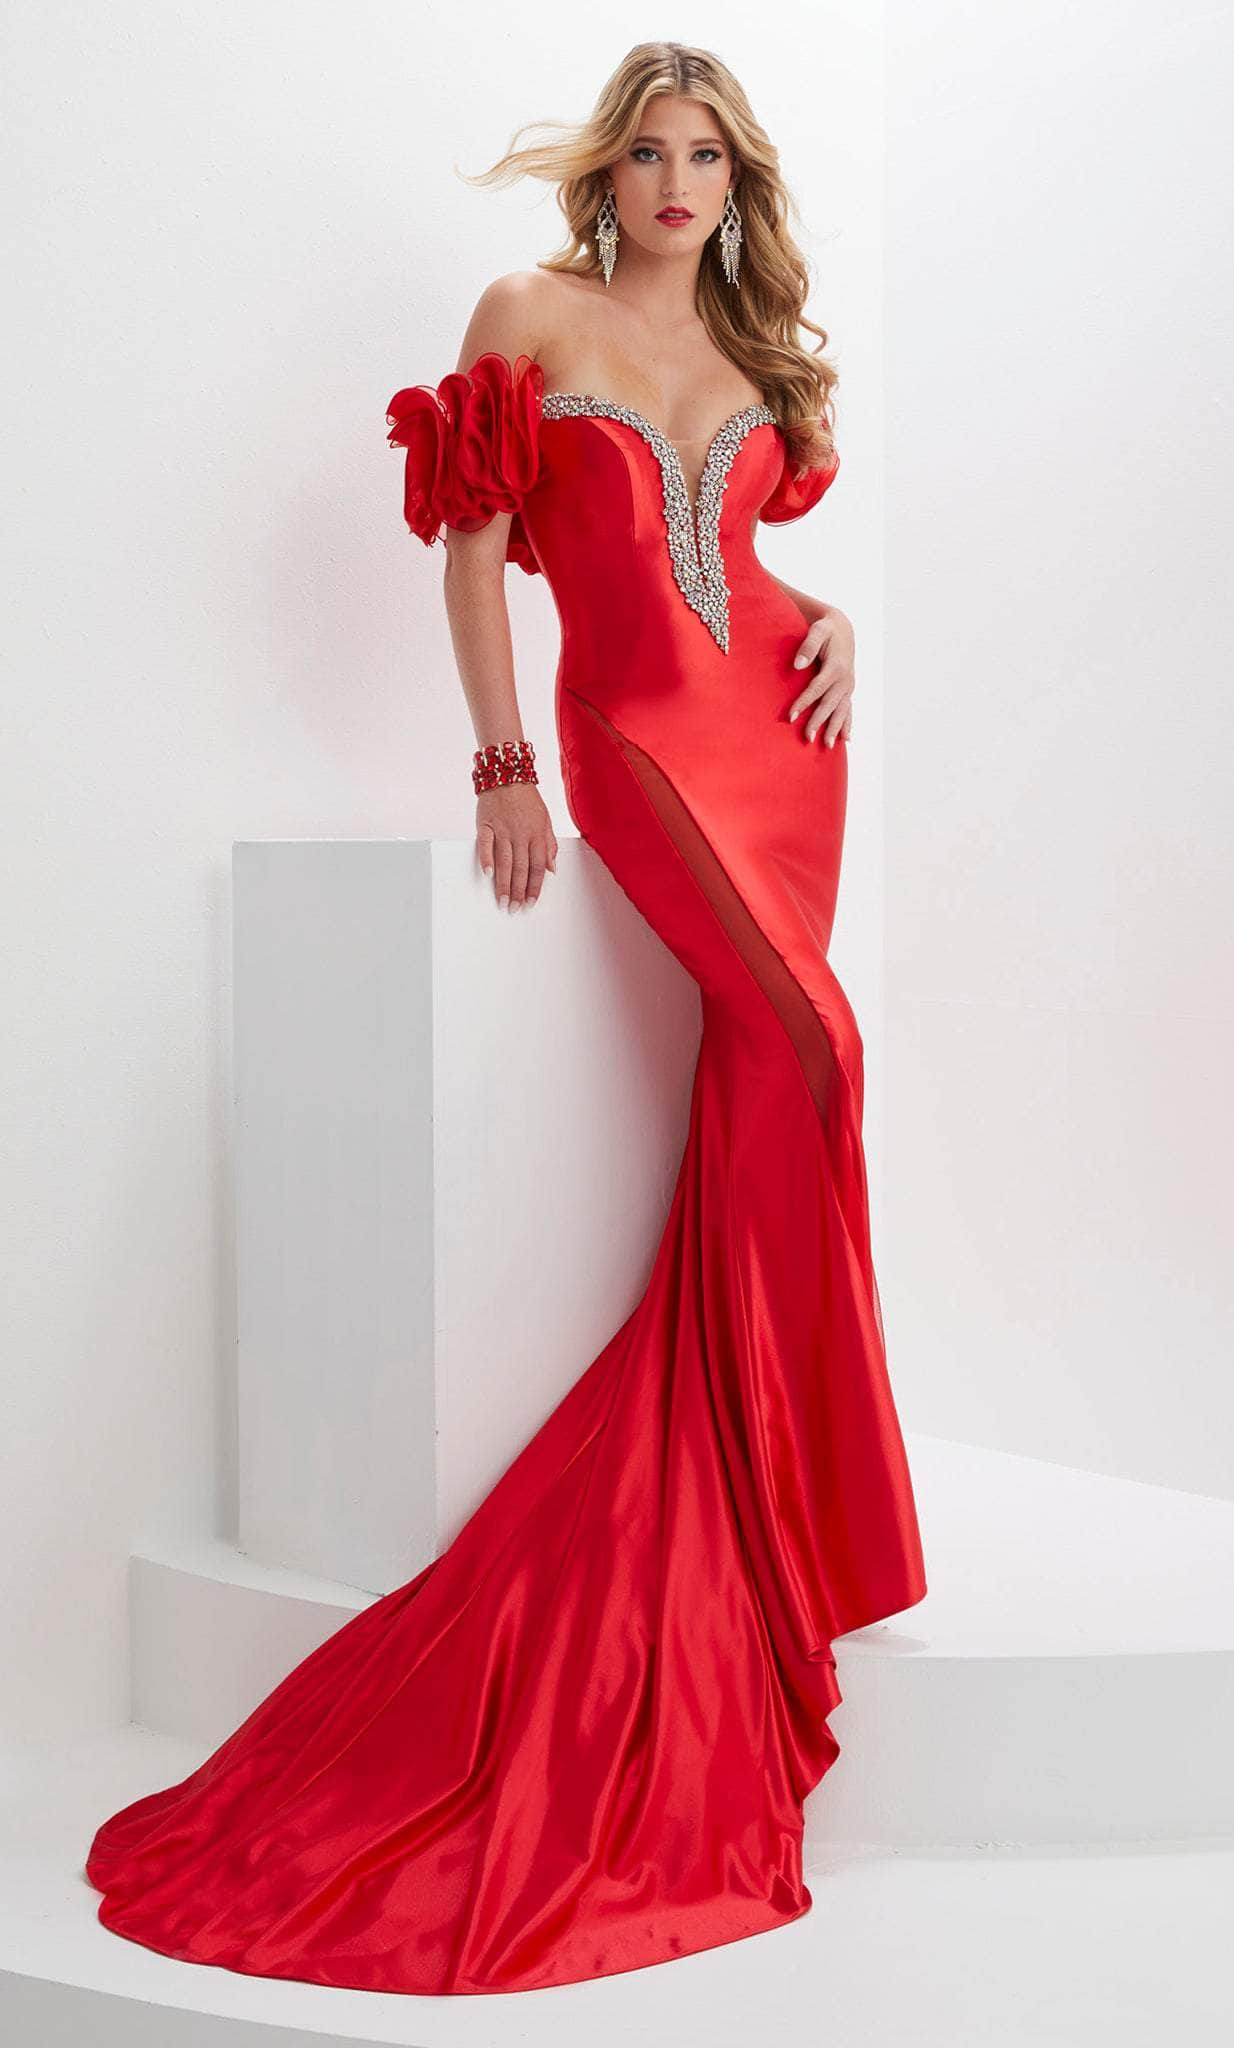 Image of Panoply 14126 - Off Shoulder Ruffle Evening Gown